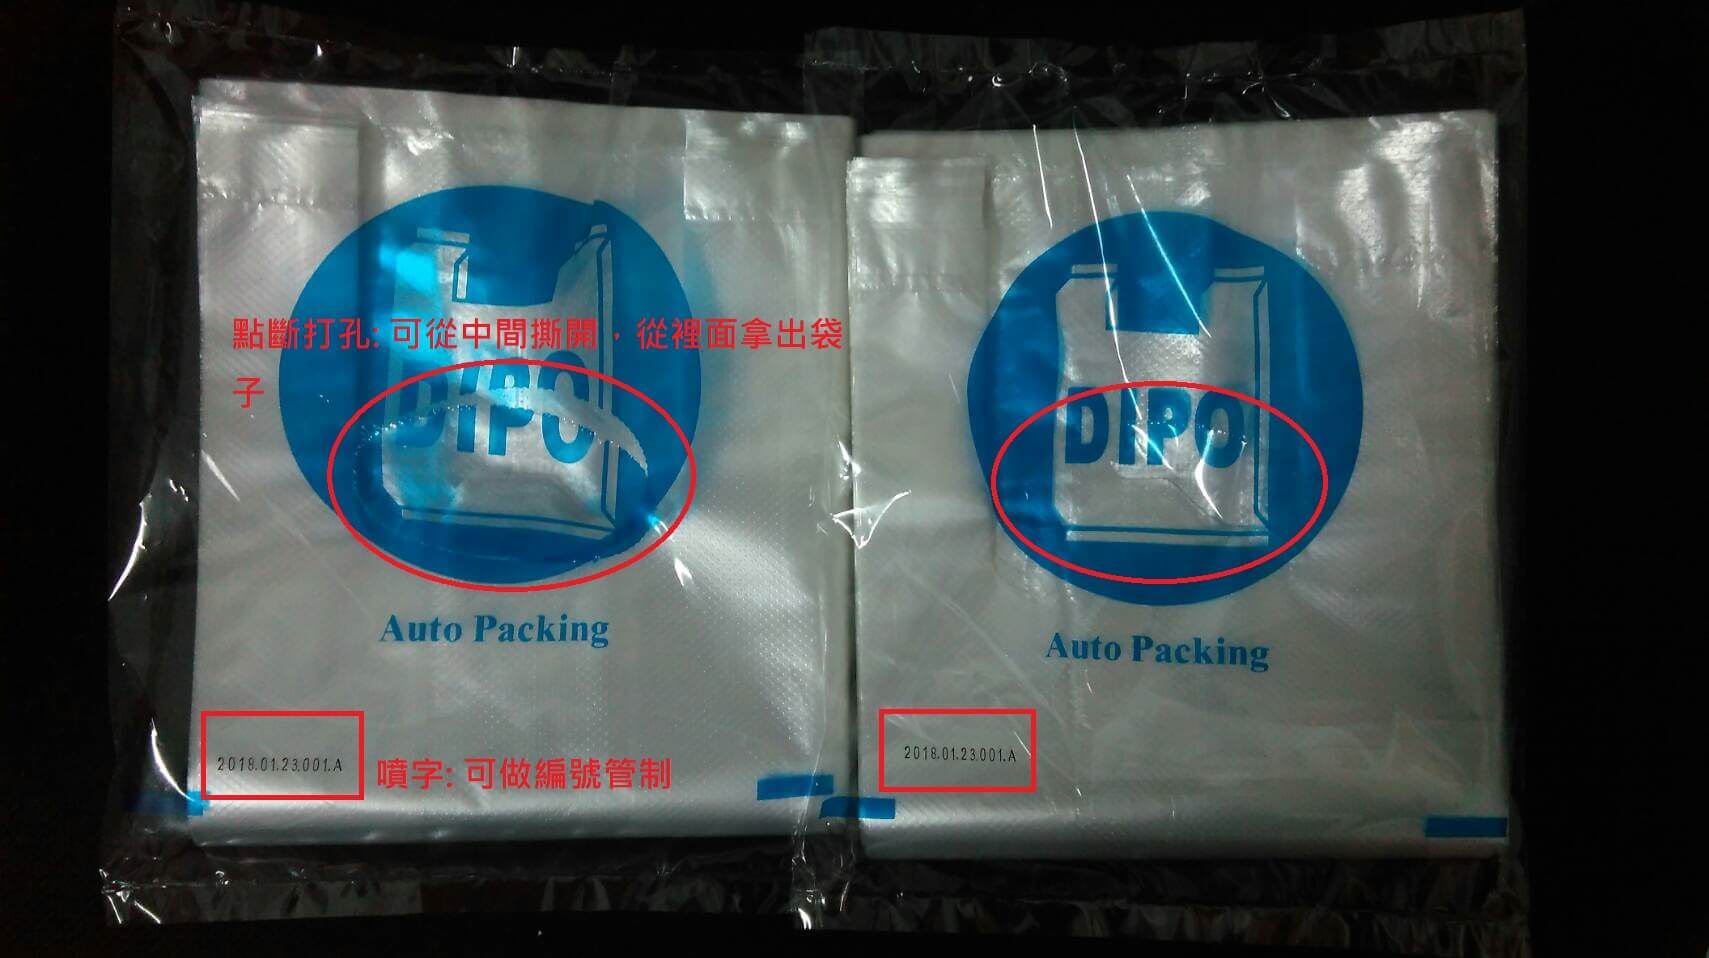 We have added new features to the automatic packaging machine for our costumer in Thailand: inkjet printer and oval puncher.